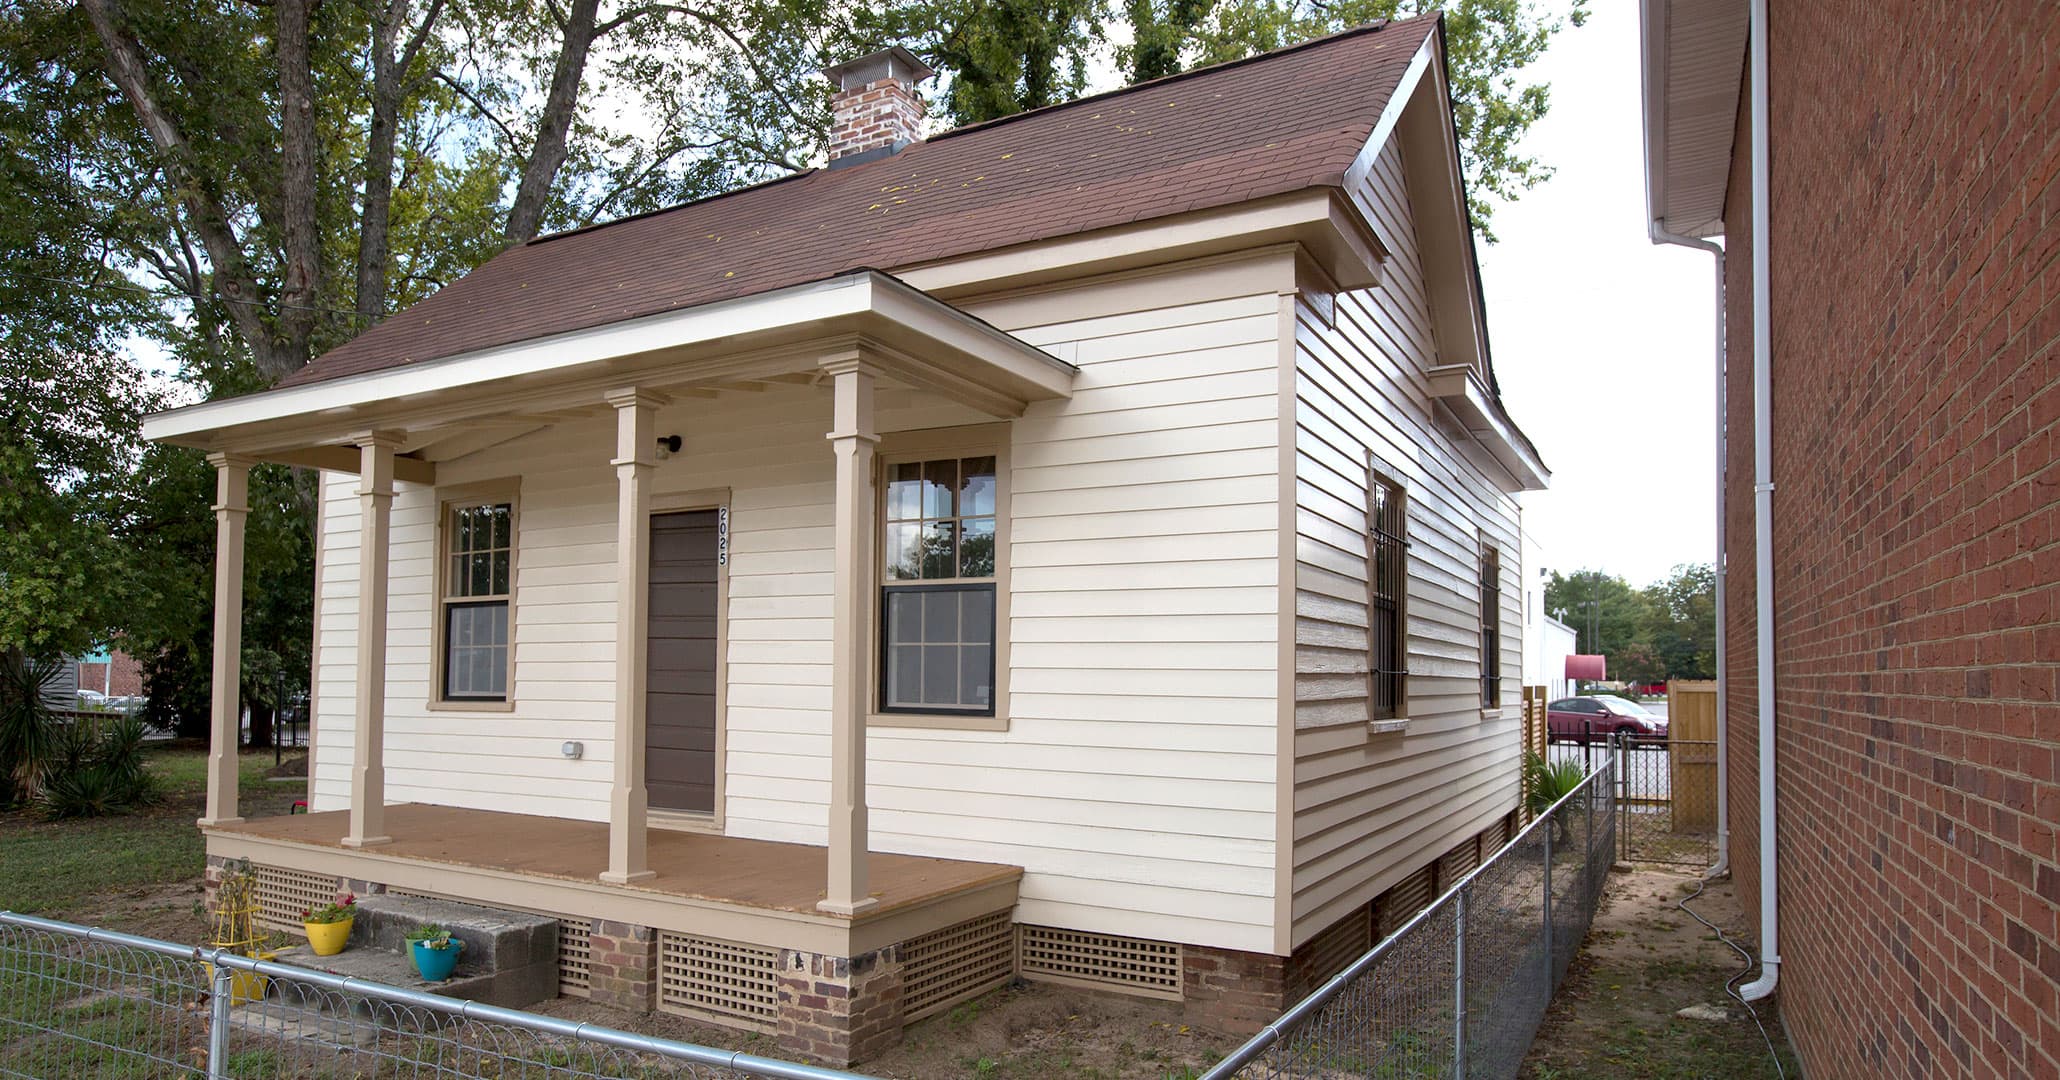 Boudreaux designers are expert historic preservationists, we worked with Historic Columbia to improve black cultural site Modjeska Simkins House.